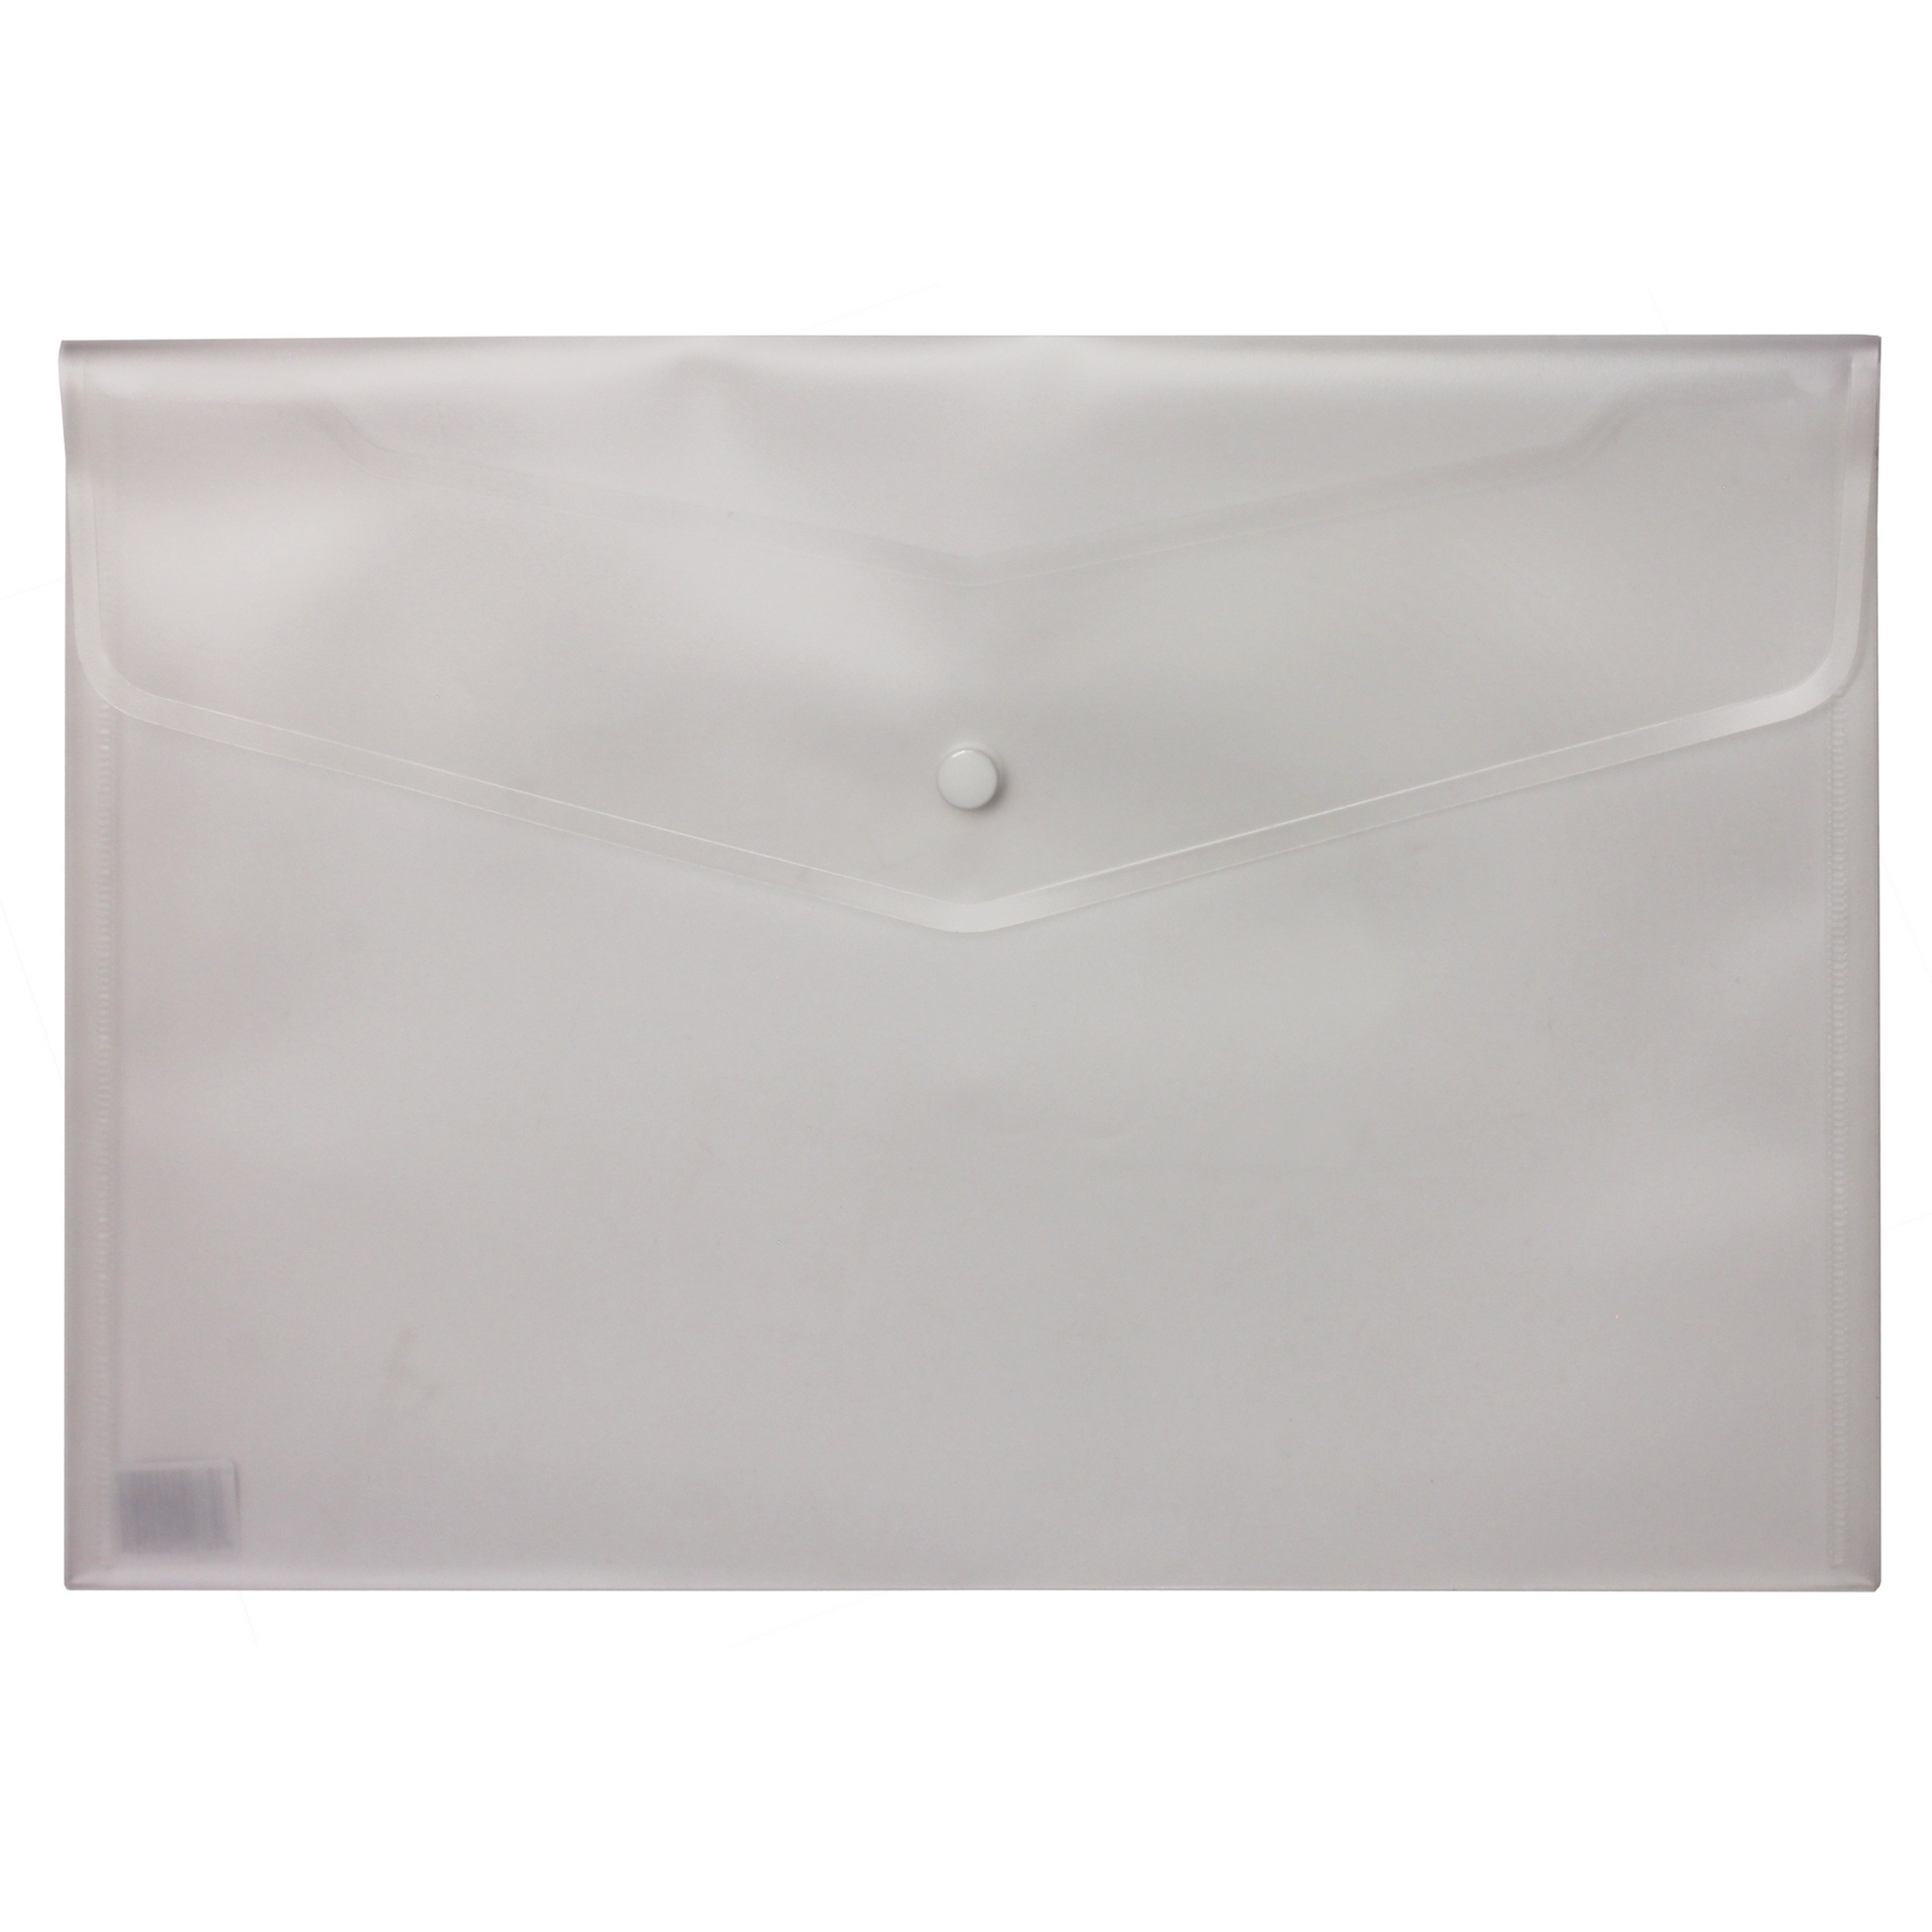 Clear A4-sized plastic stud wallet with a snap-button closure, displayed against a white background.